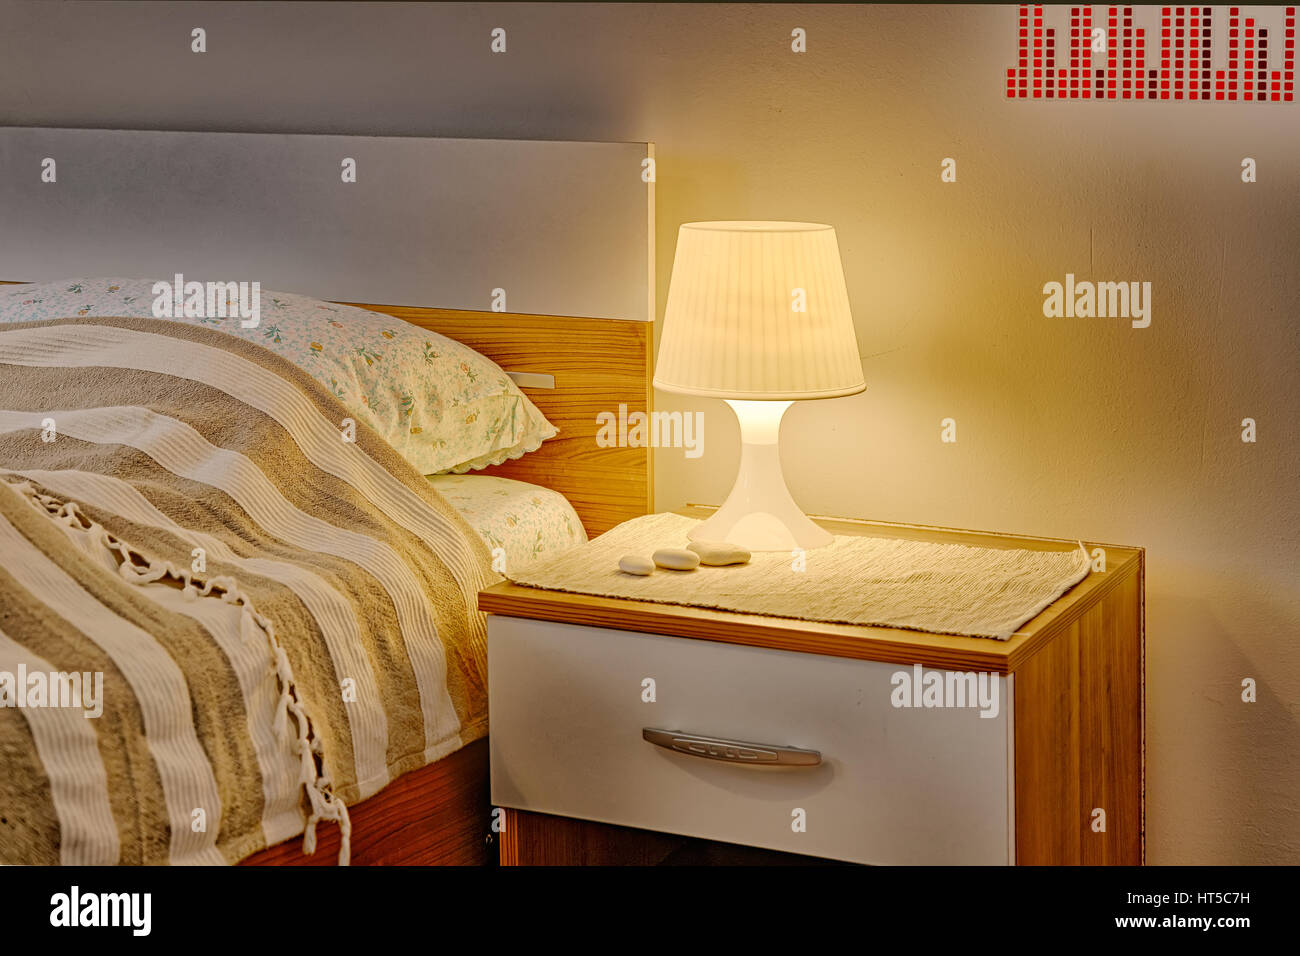 wallstickers, bedside table and lamp Stock Photo